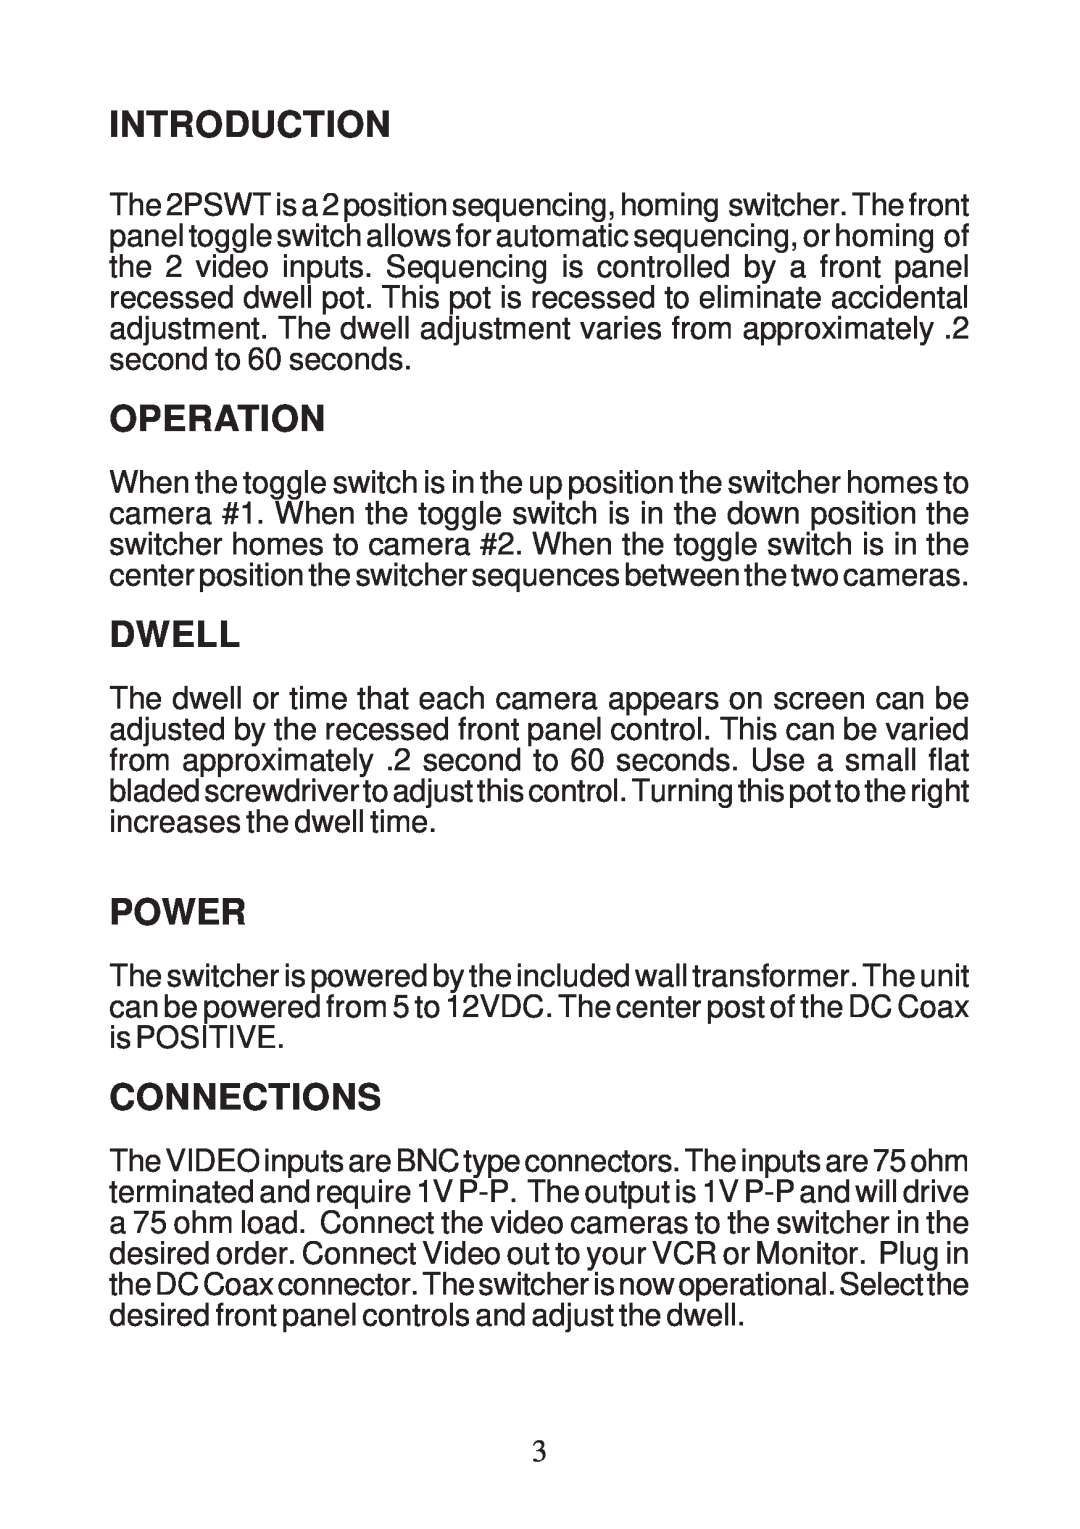 AVE 2PSWT operation manual Introduction, Operation, Dwell, Power, Connections 